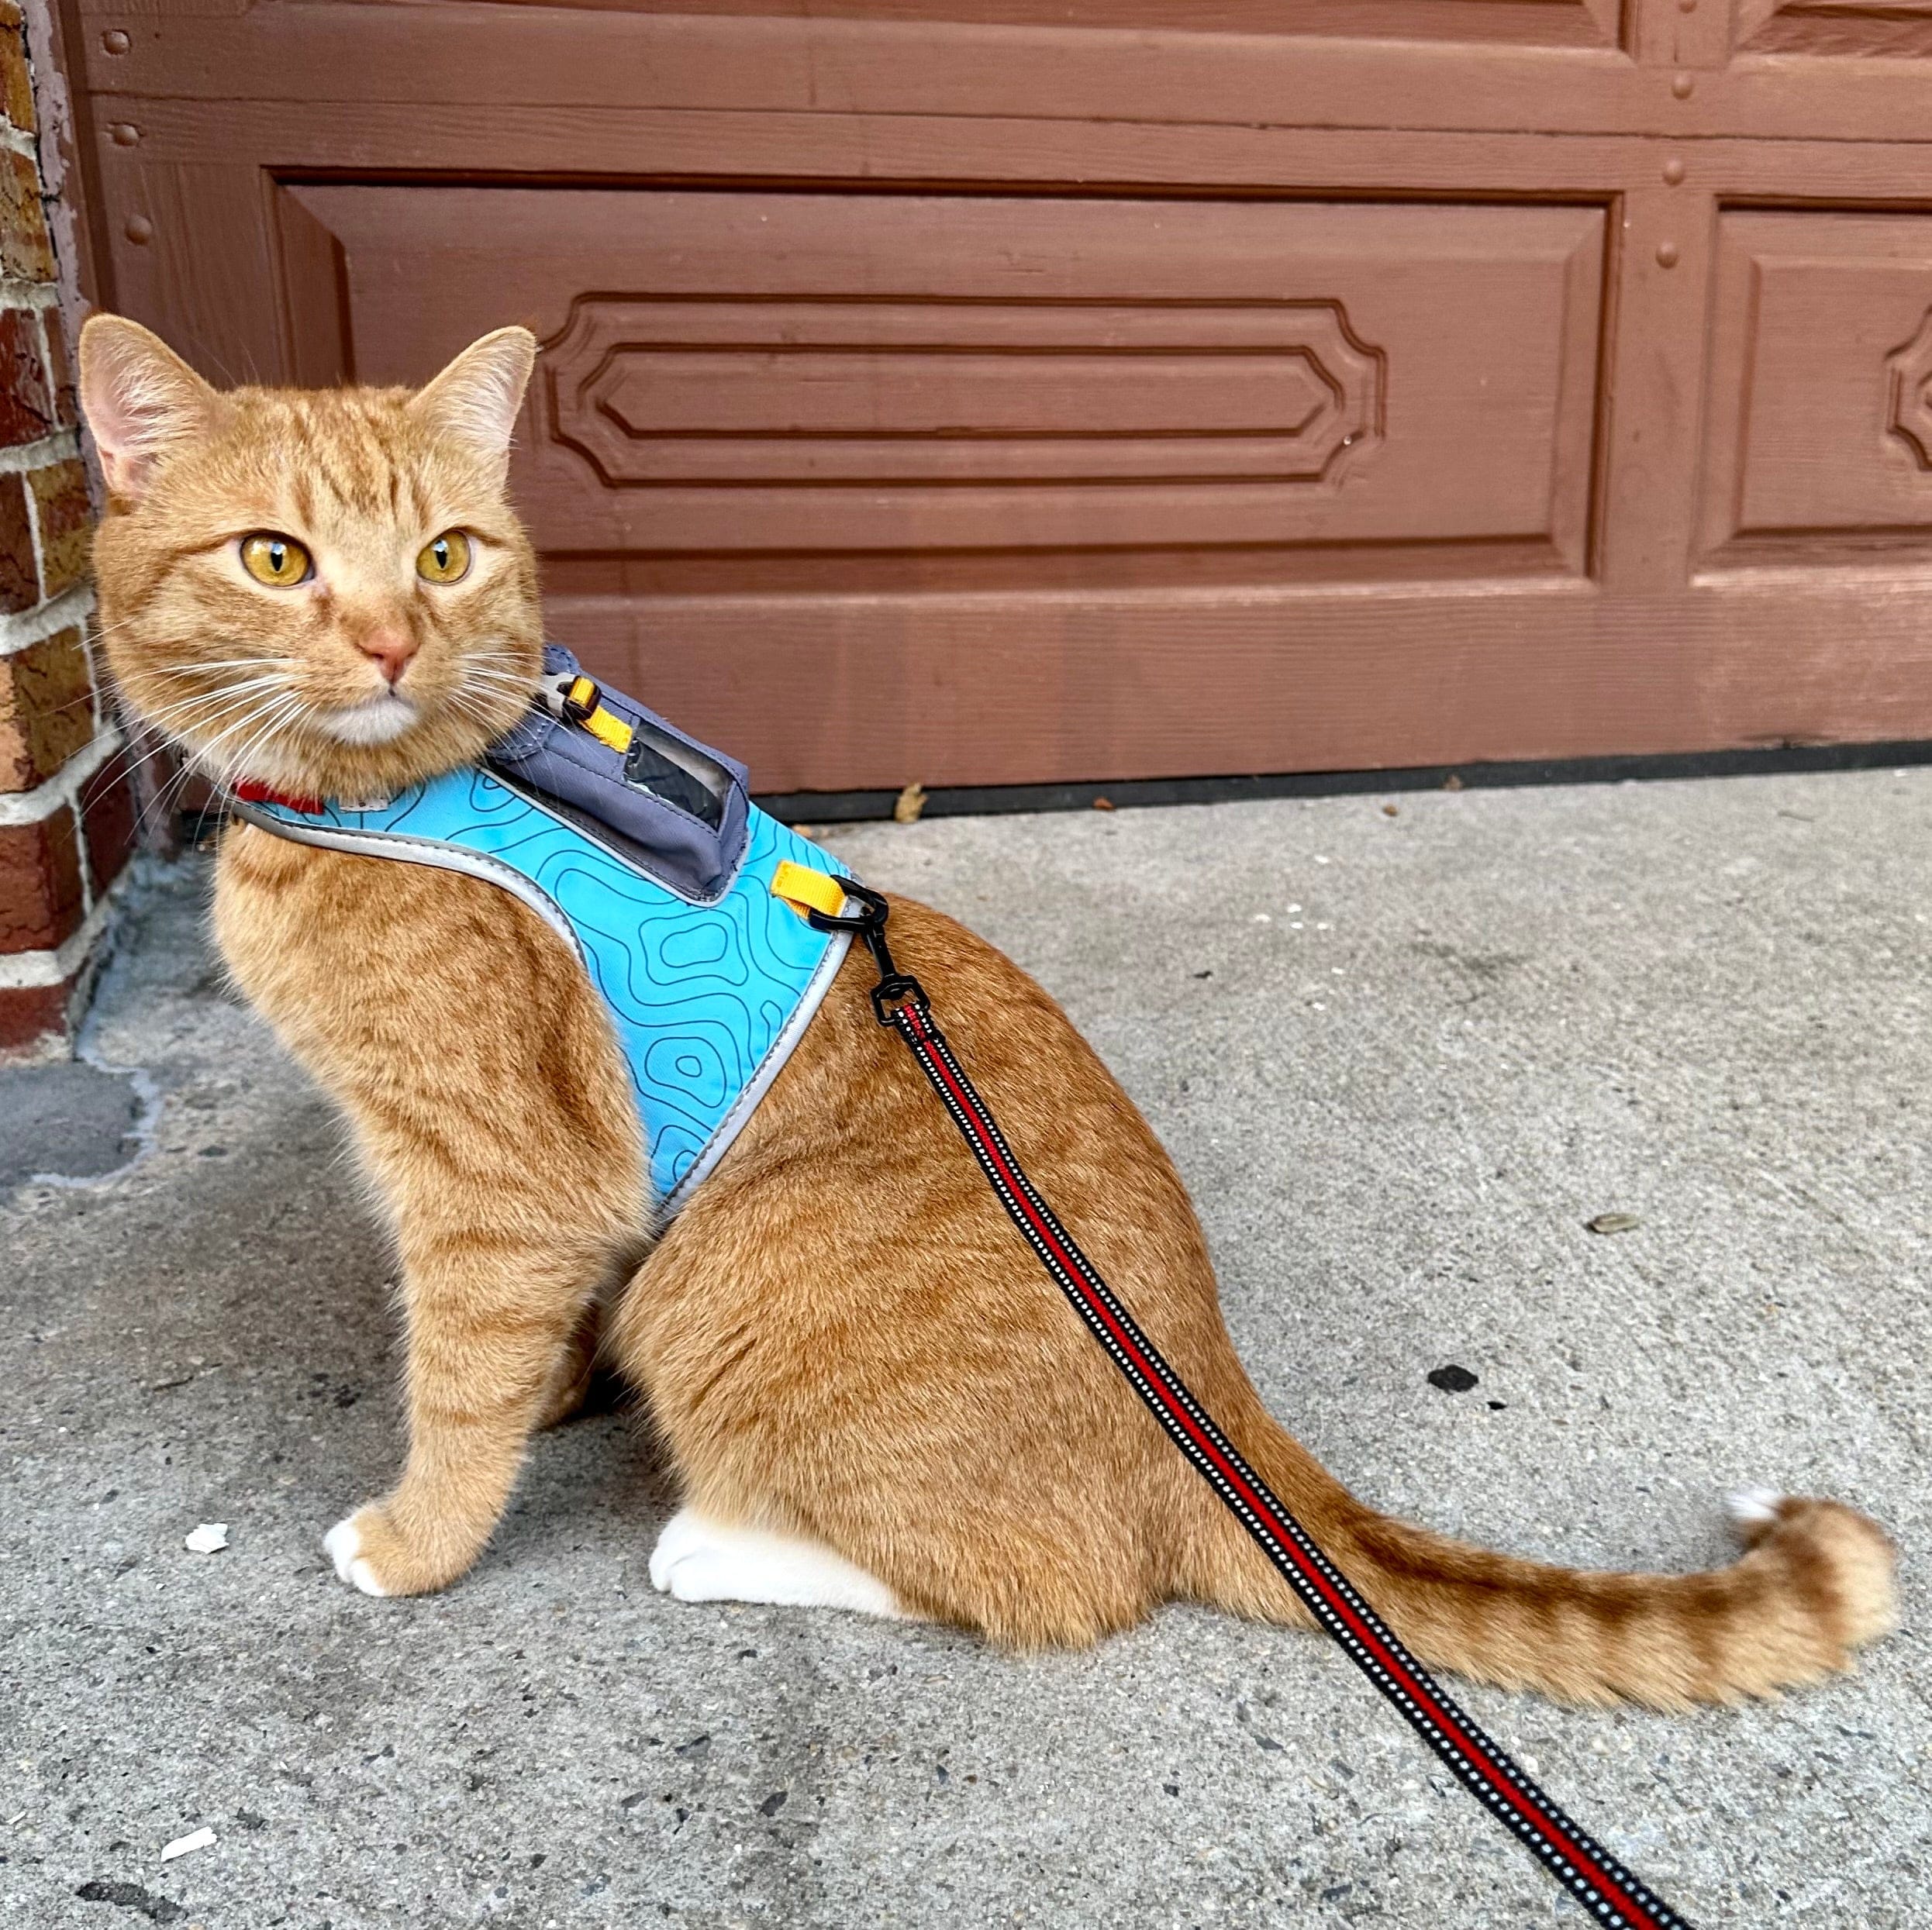 "The Pathfinder" Cat Harness with GPS Tracker Pocket - Powered by Tractive